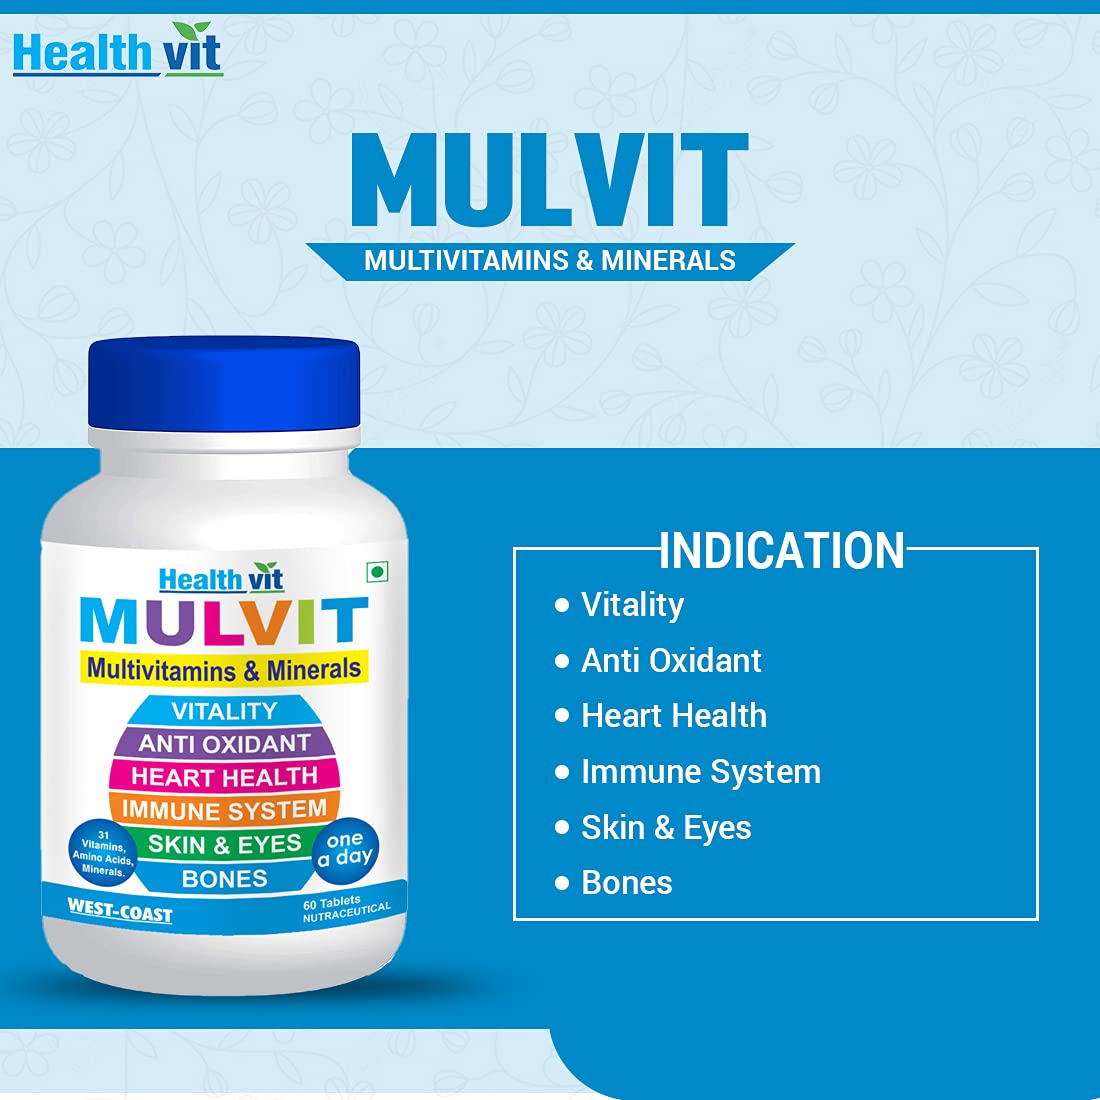 Healthvit Mulvit Multivitamins and Minerals (60 Tablets) with 31 Nutrients (Vitamins, Minerals and Amino Acids) | Anti-Oxidants, Beauty Blend | Energy, Brain, Bone Health